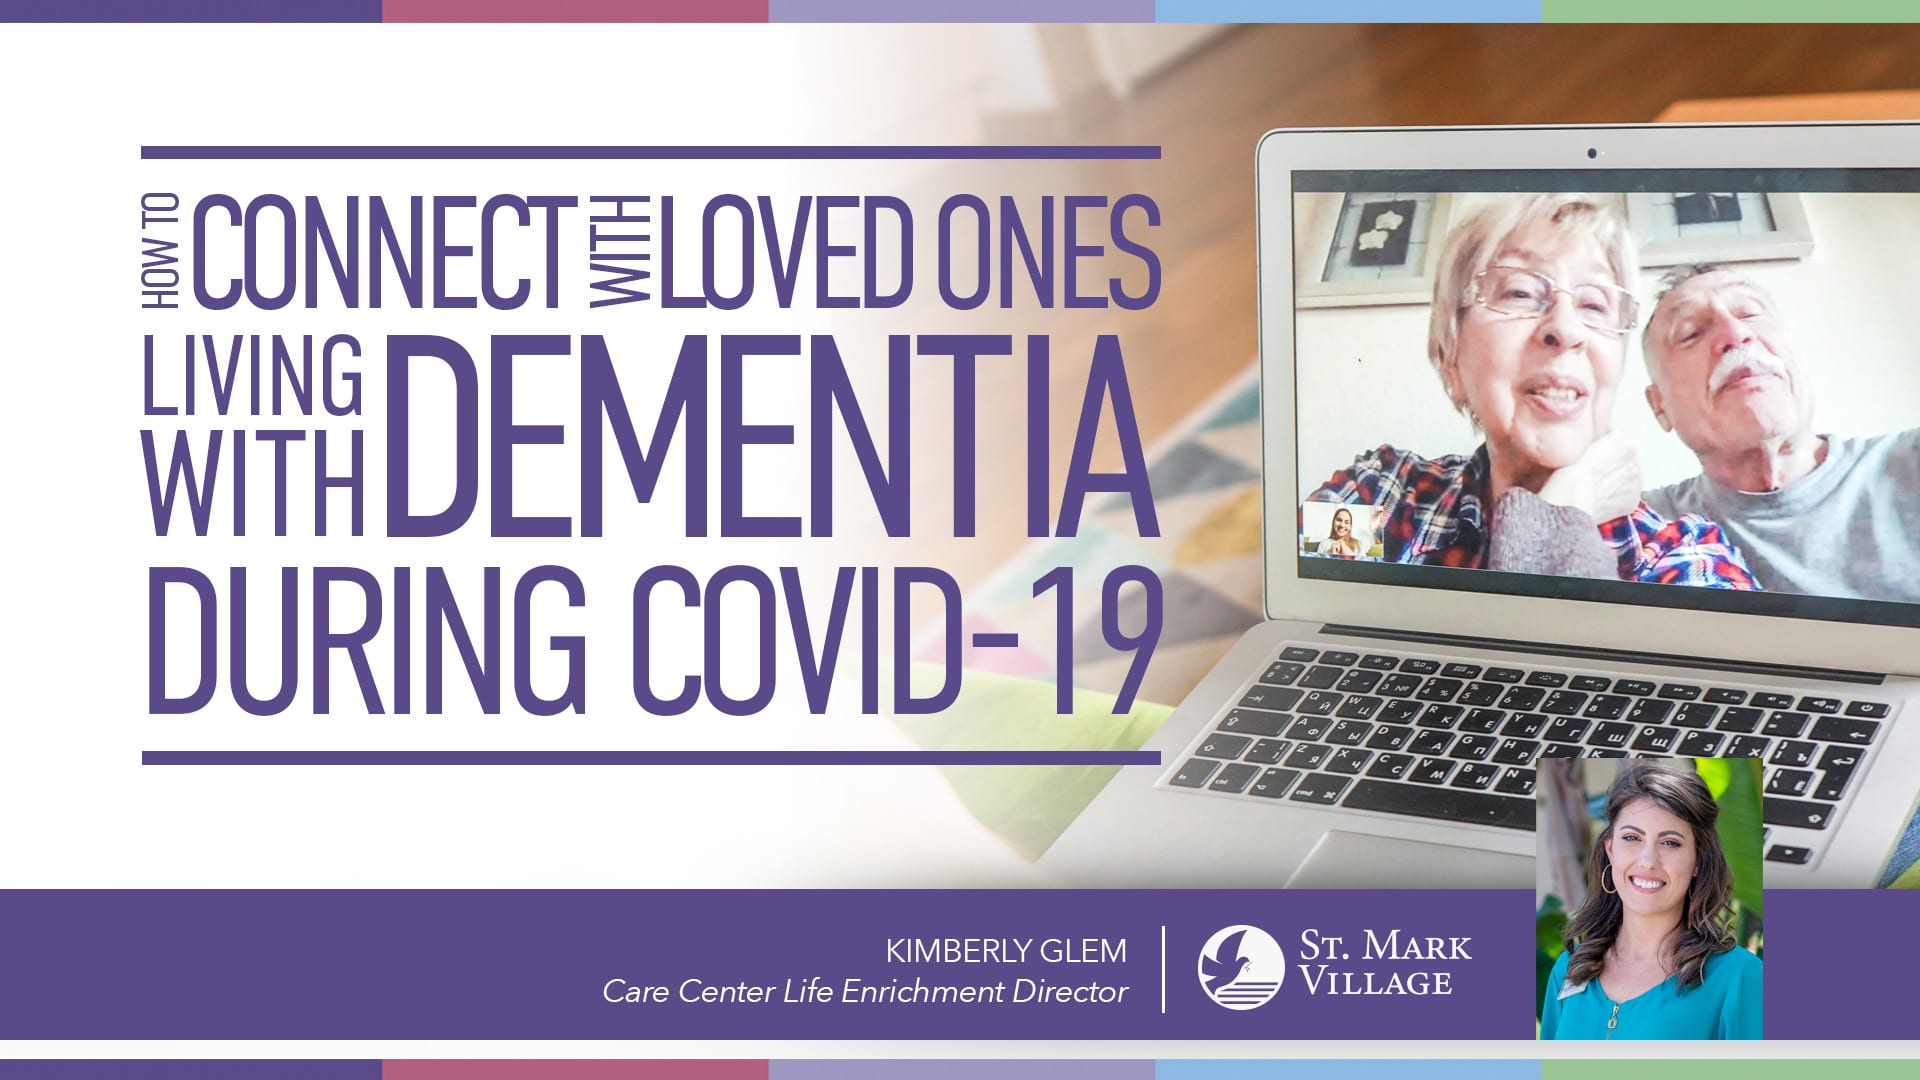 Connect with loved ones living with dementia during covid-19.